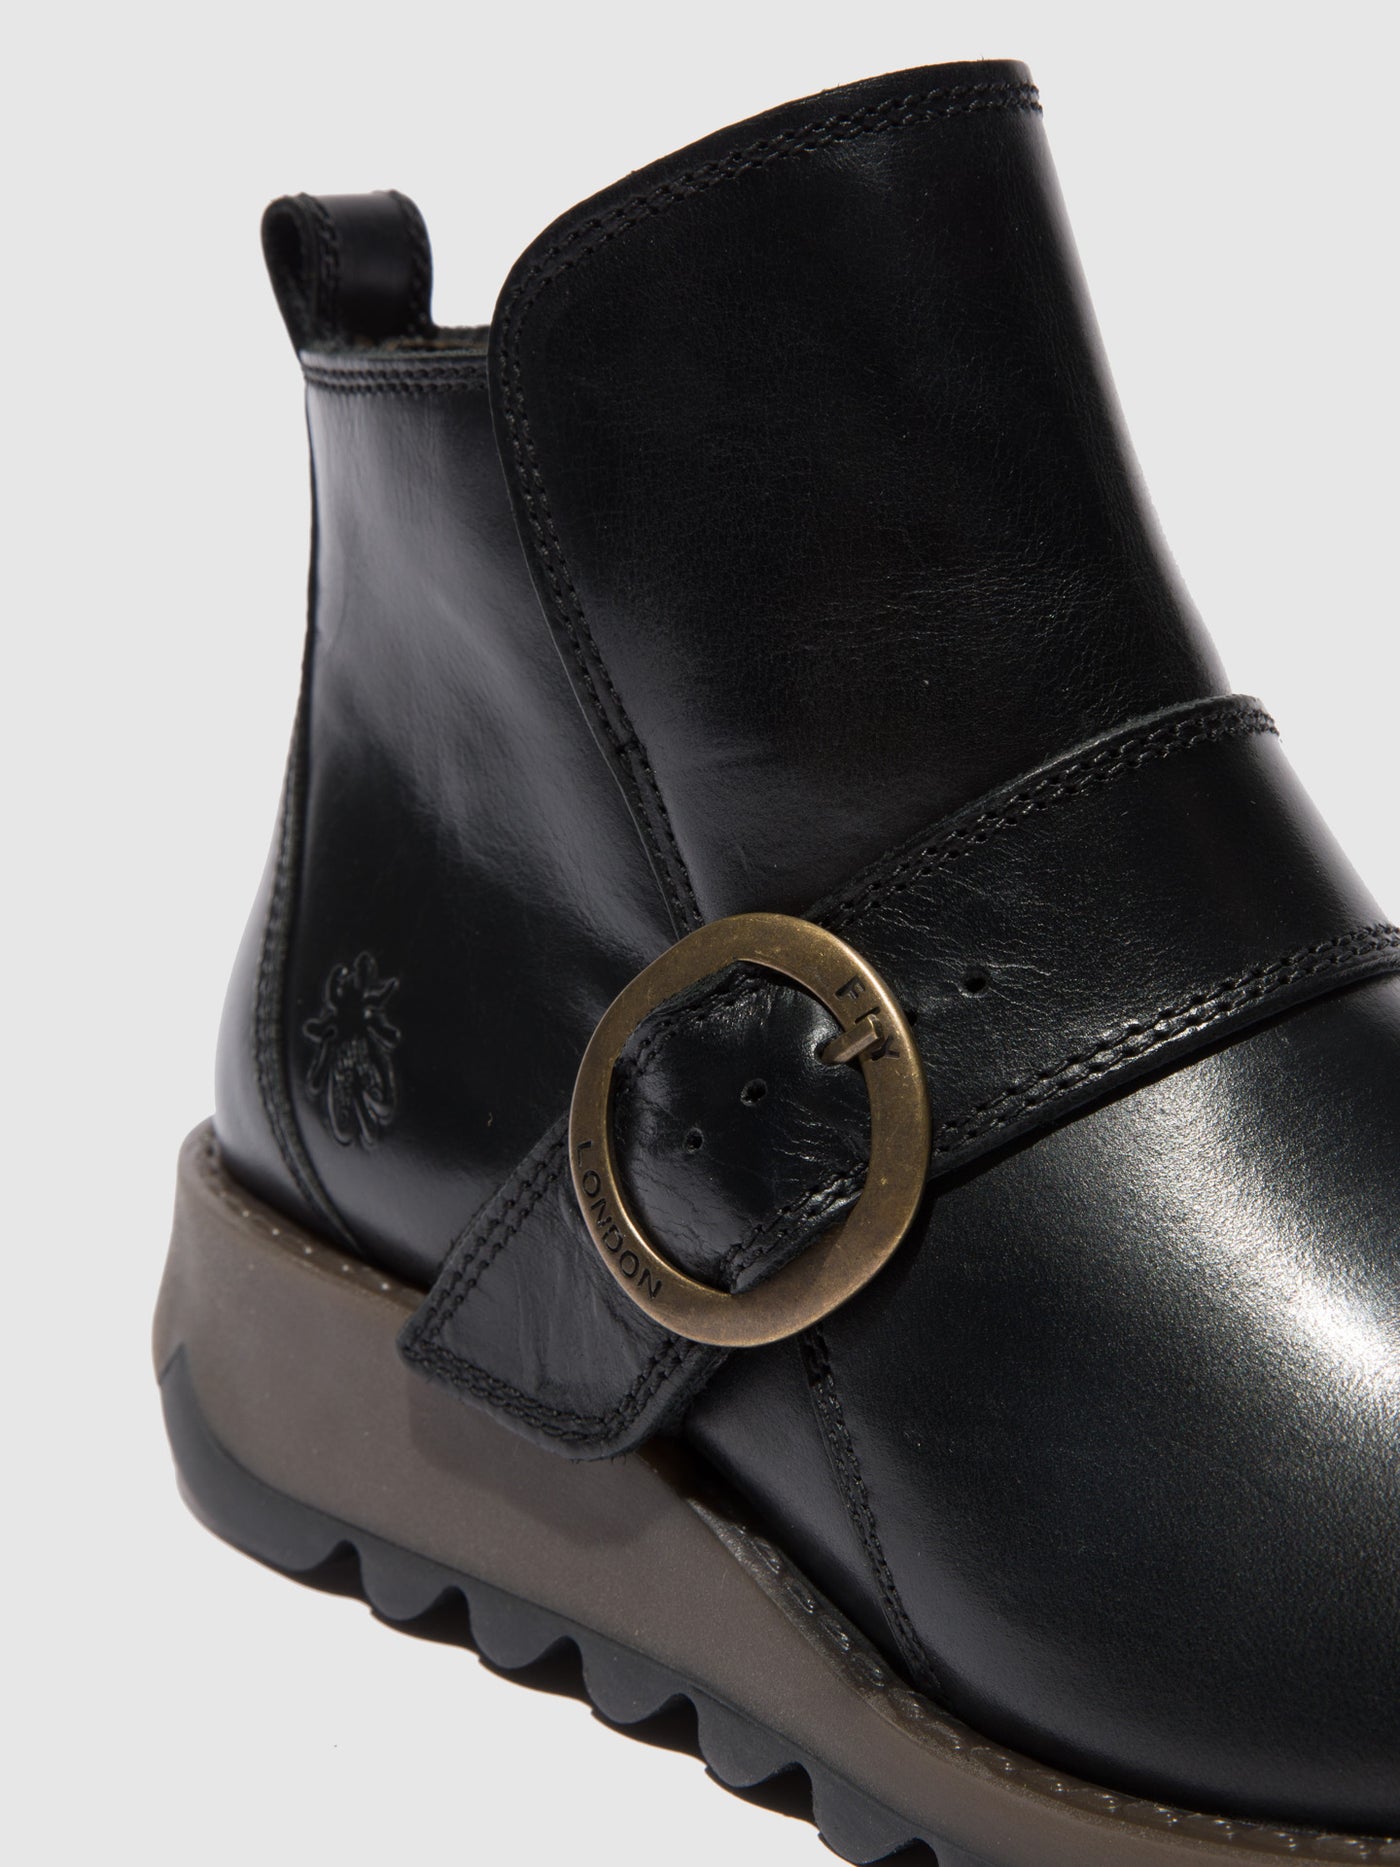 Buckle Boots SIAS812FLY RUG BLACK